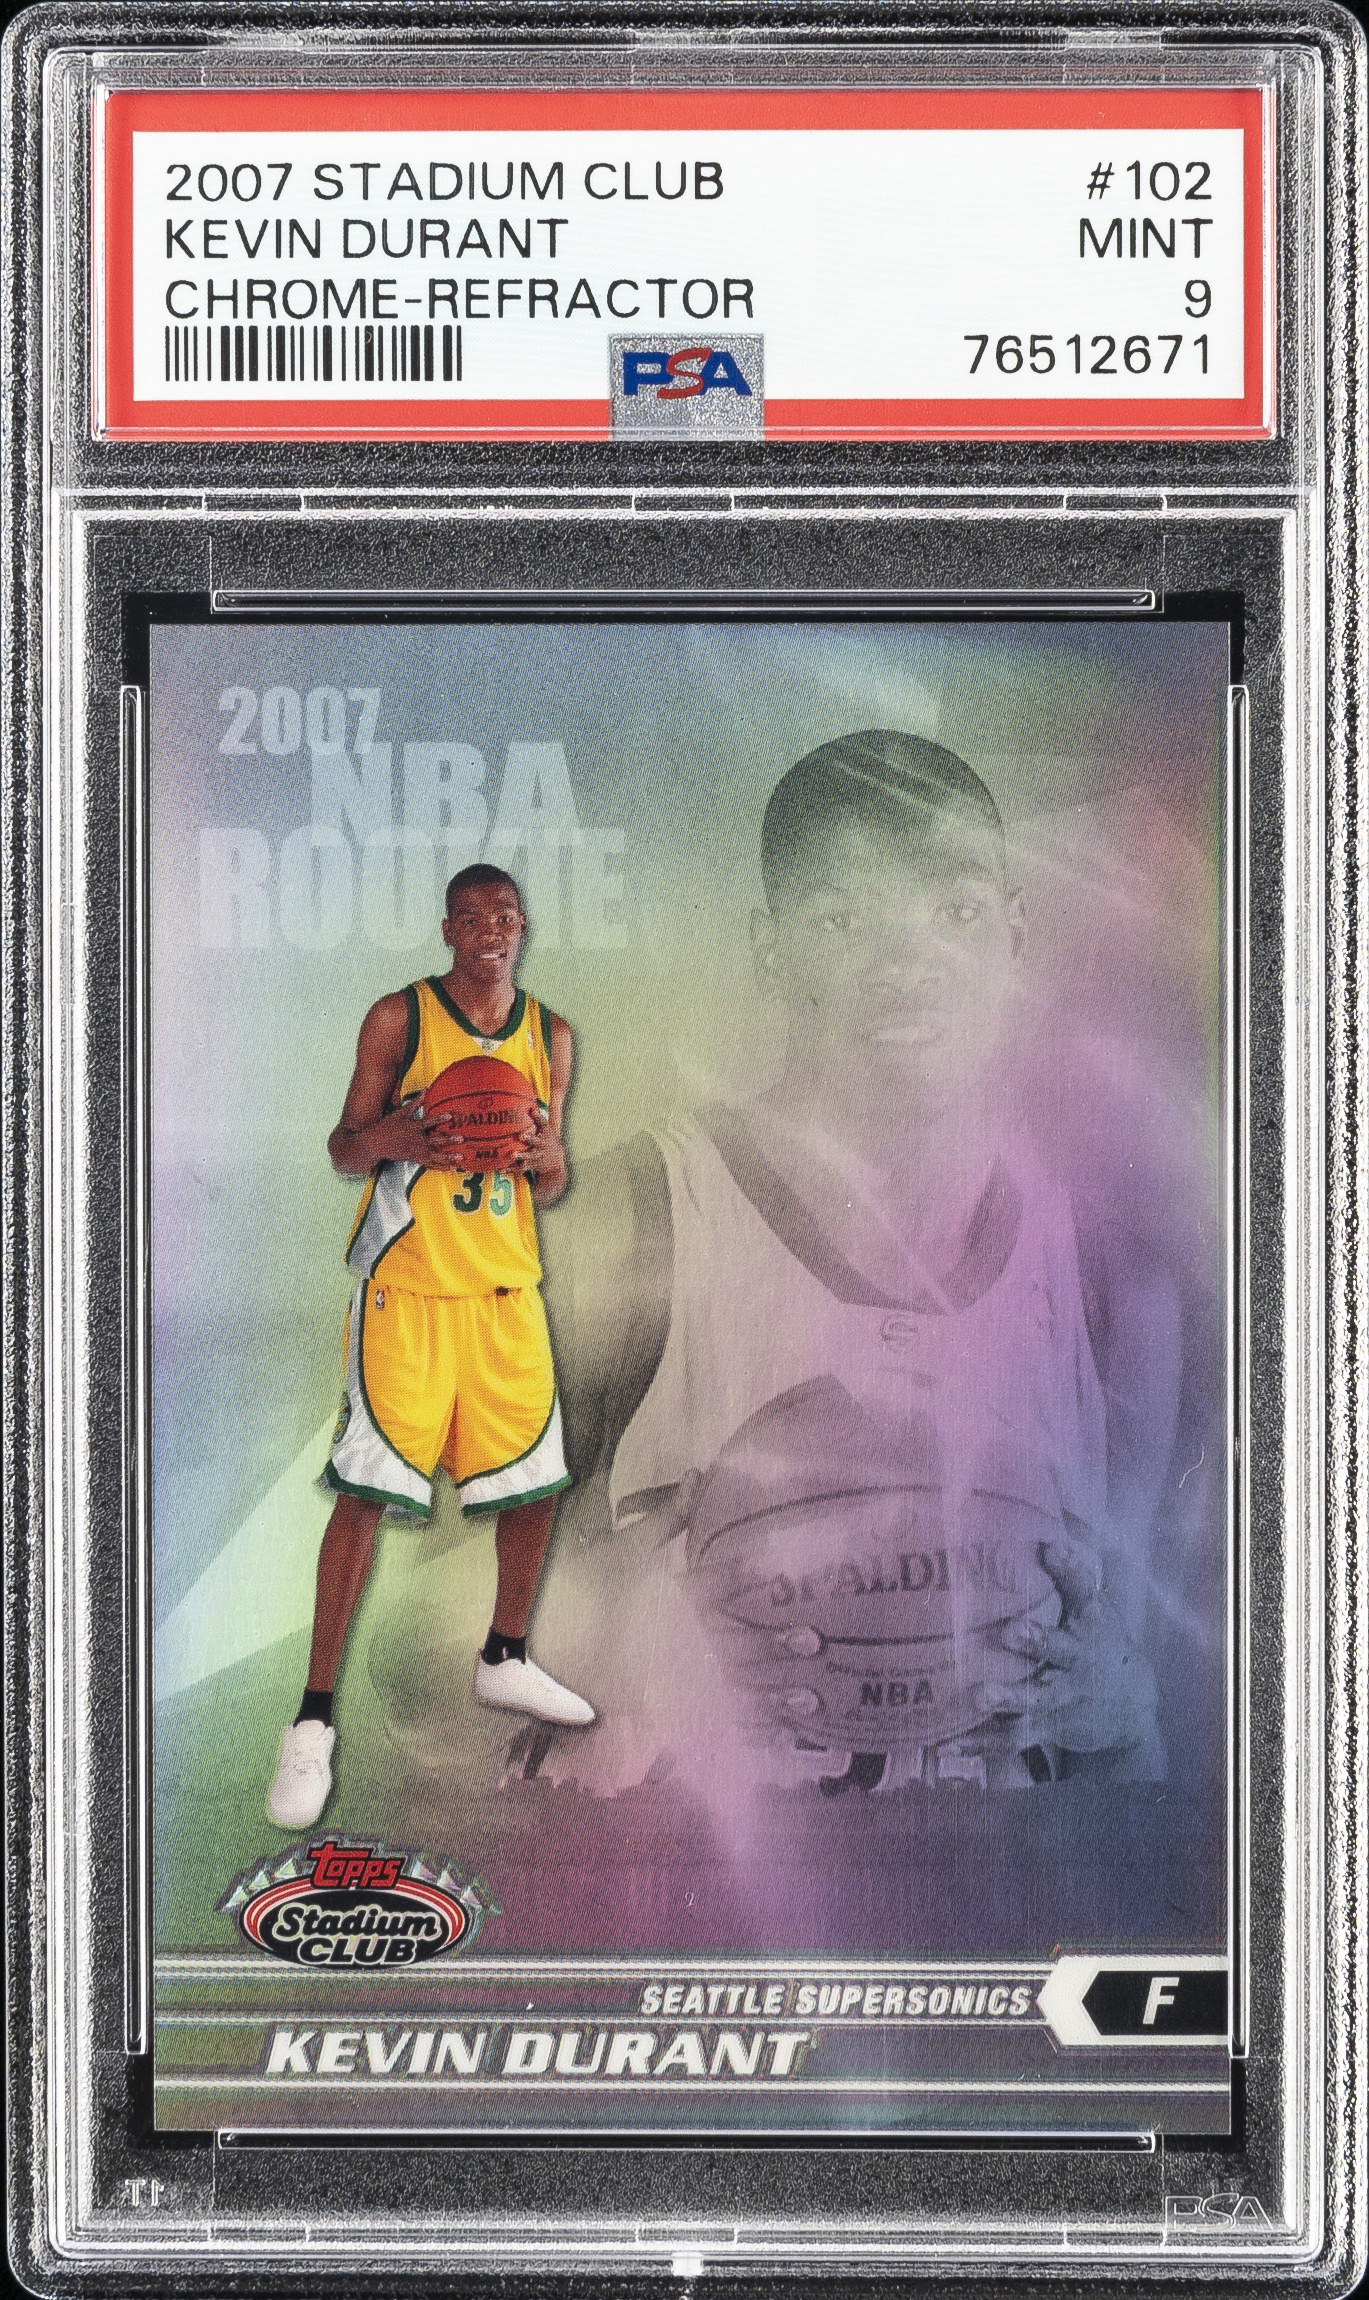 2007-08 Topps Stadium Club Chrome-Refractor #102 Kevin Durant Rookie Card (#131/999) – PSA MINT 9